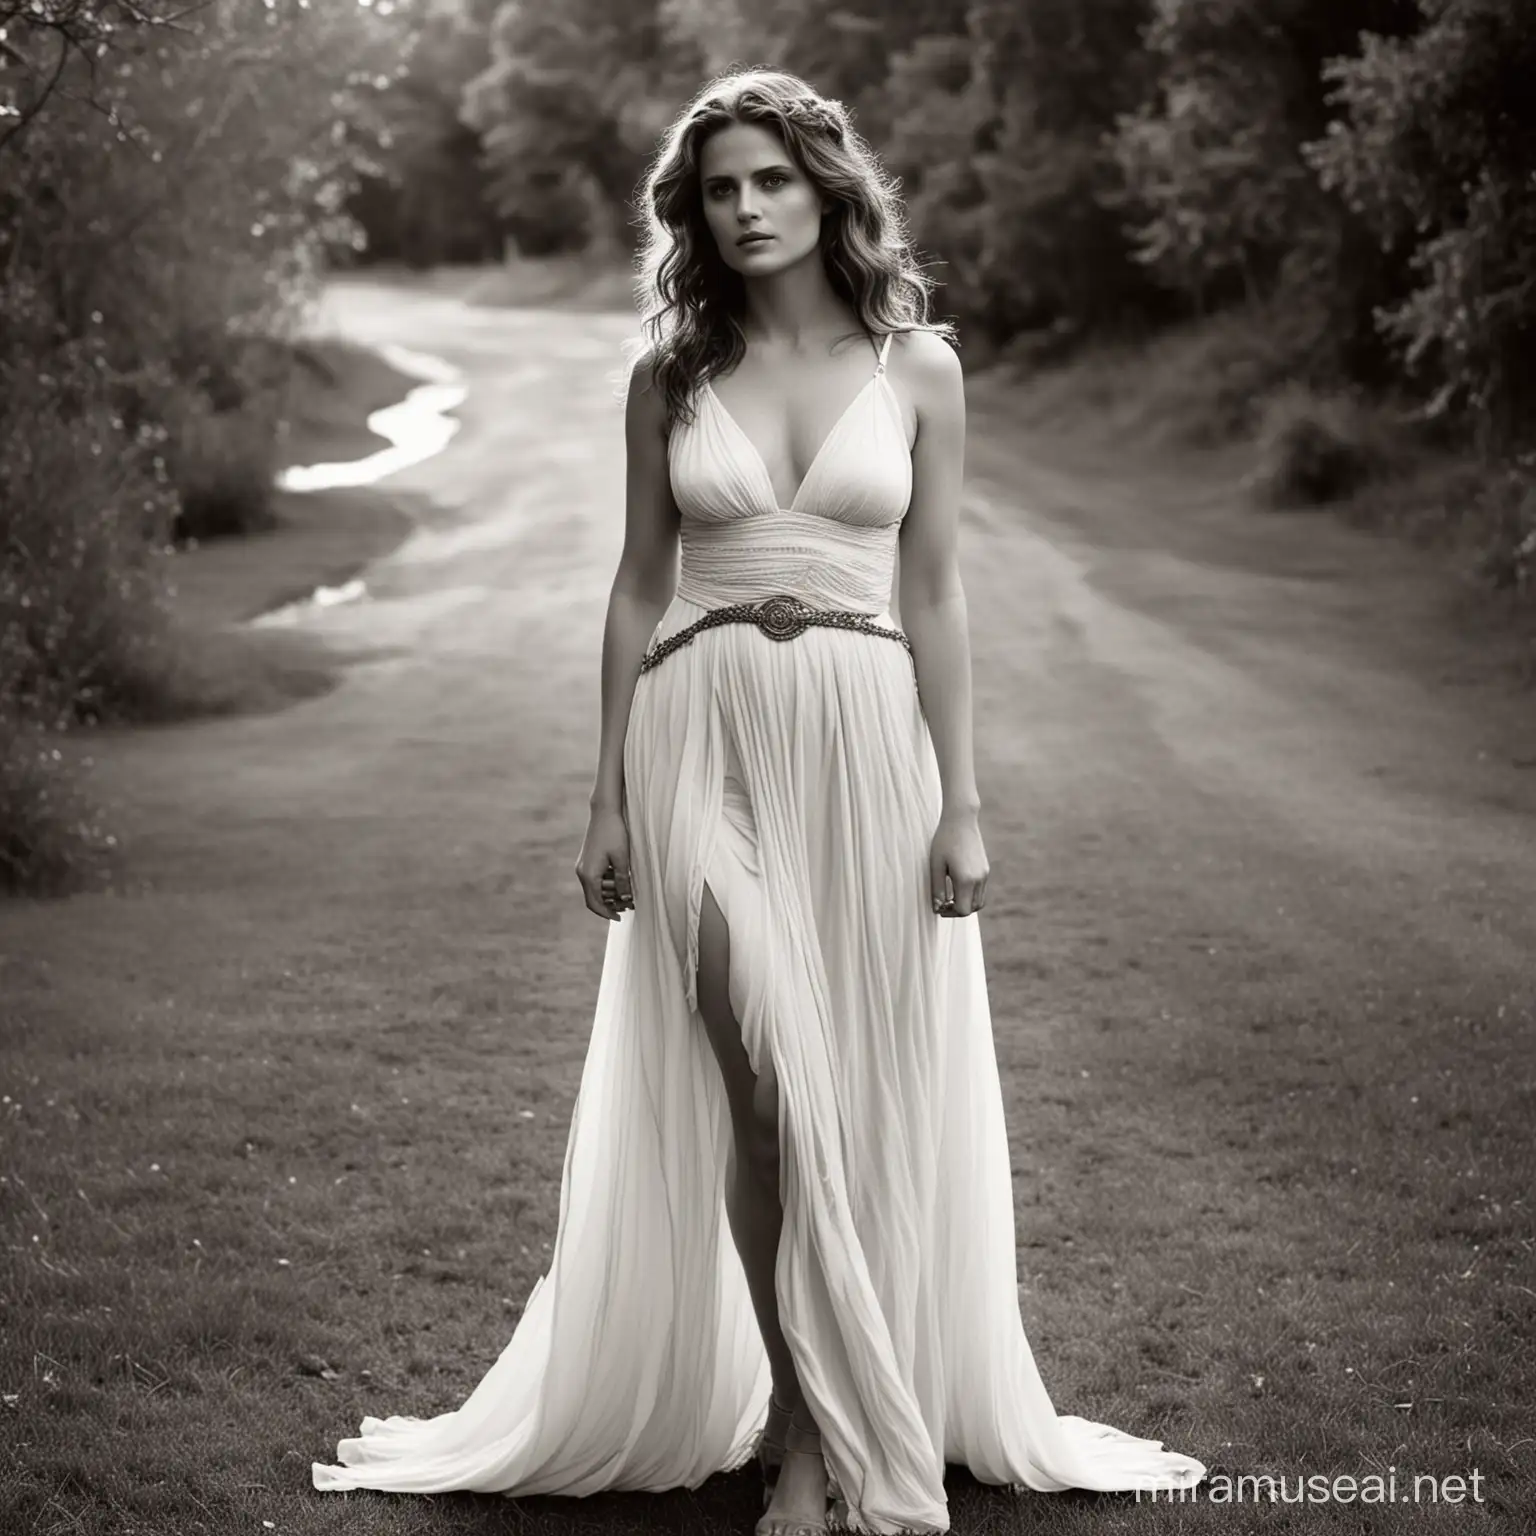 by Sally Mann] godess Aphrodite in the guise of Stana Katic full body in back